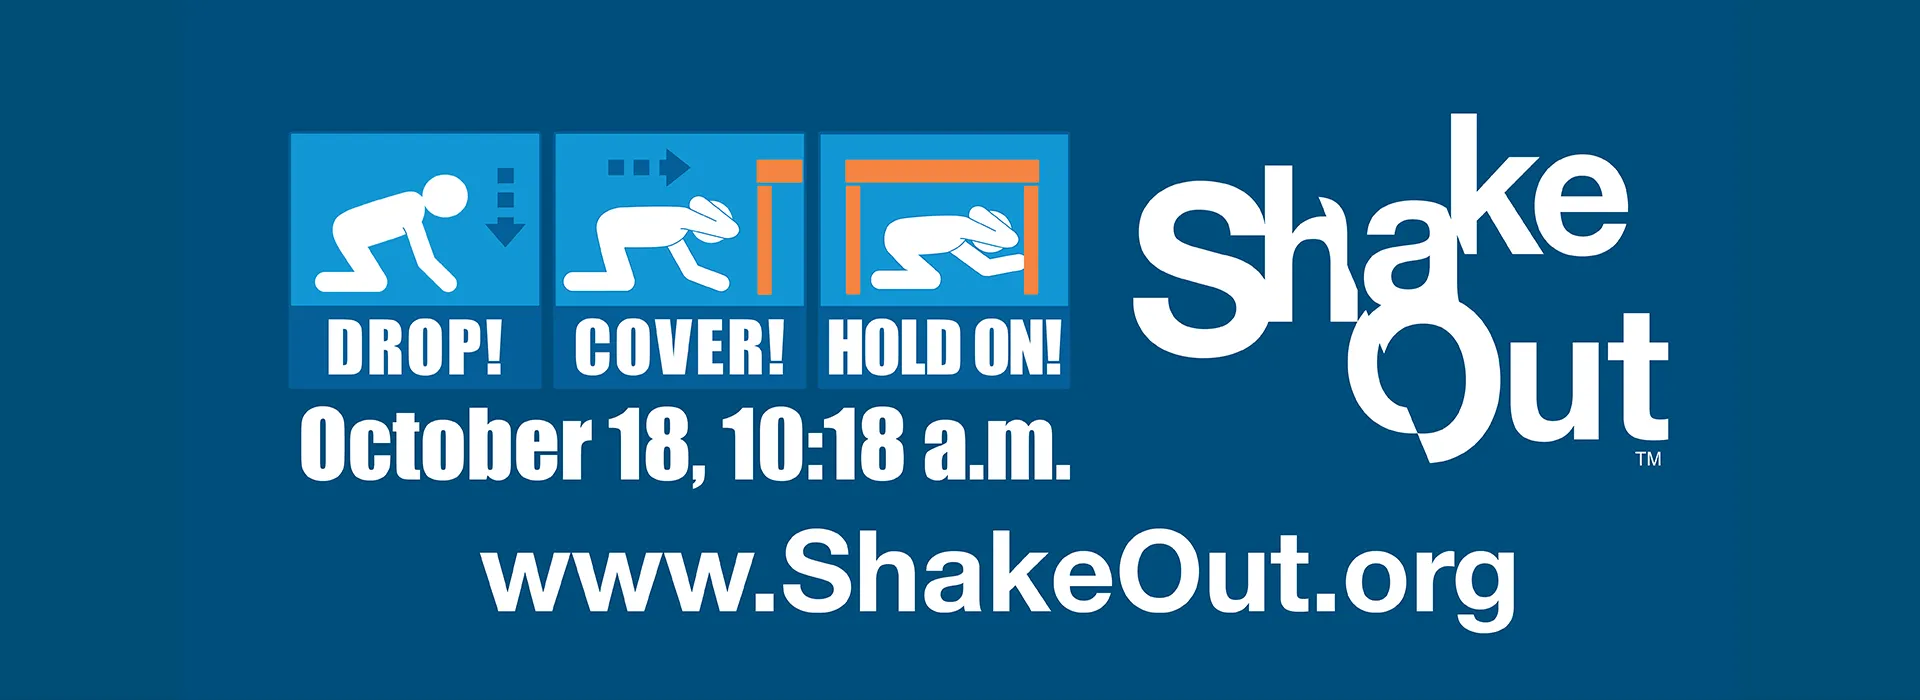 Great ShakeOut earthquake drill